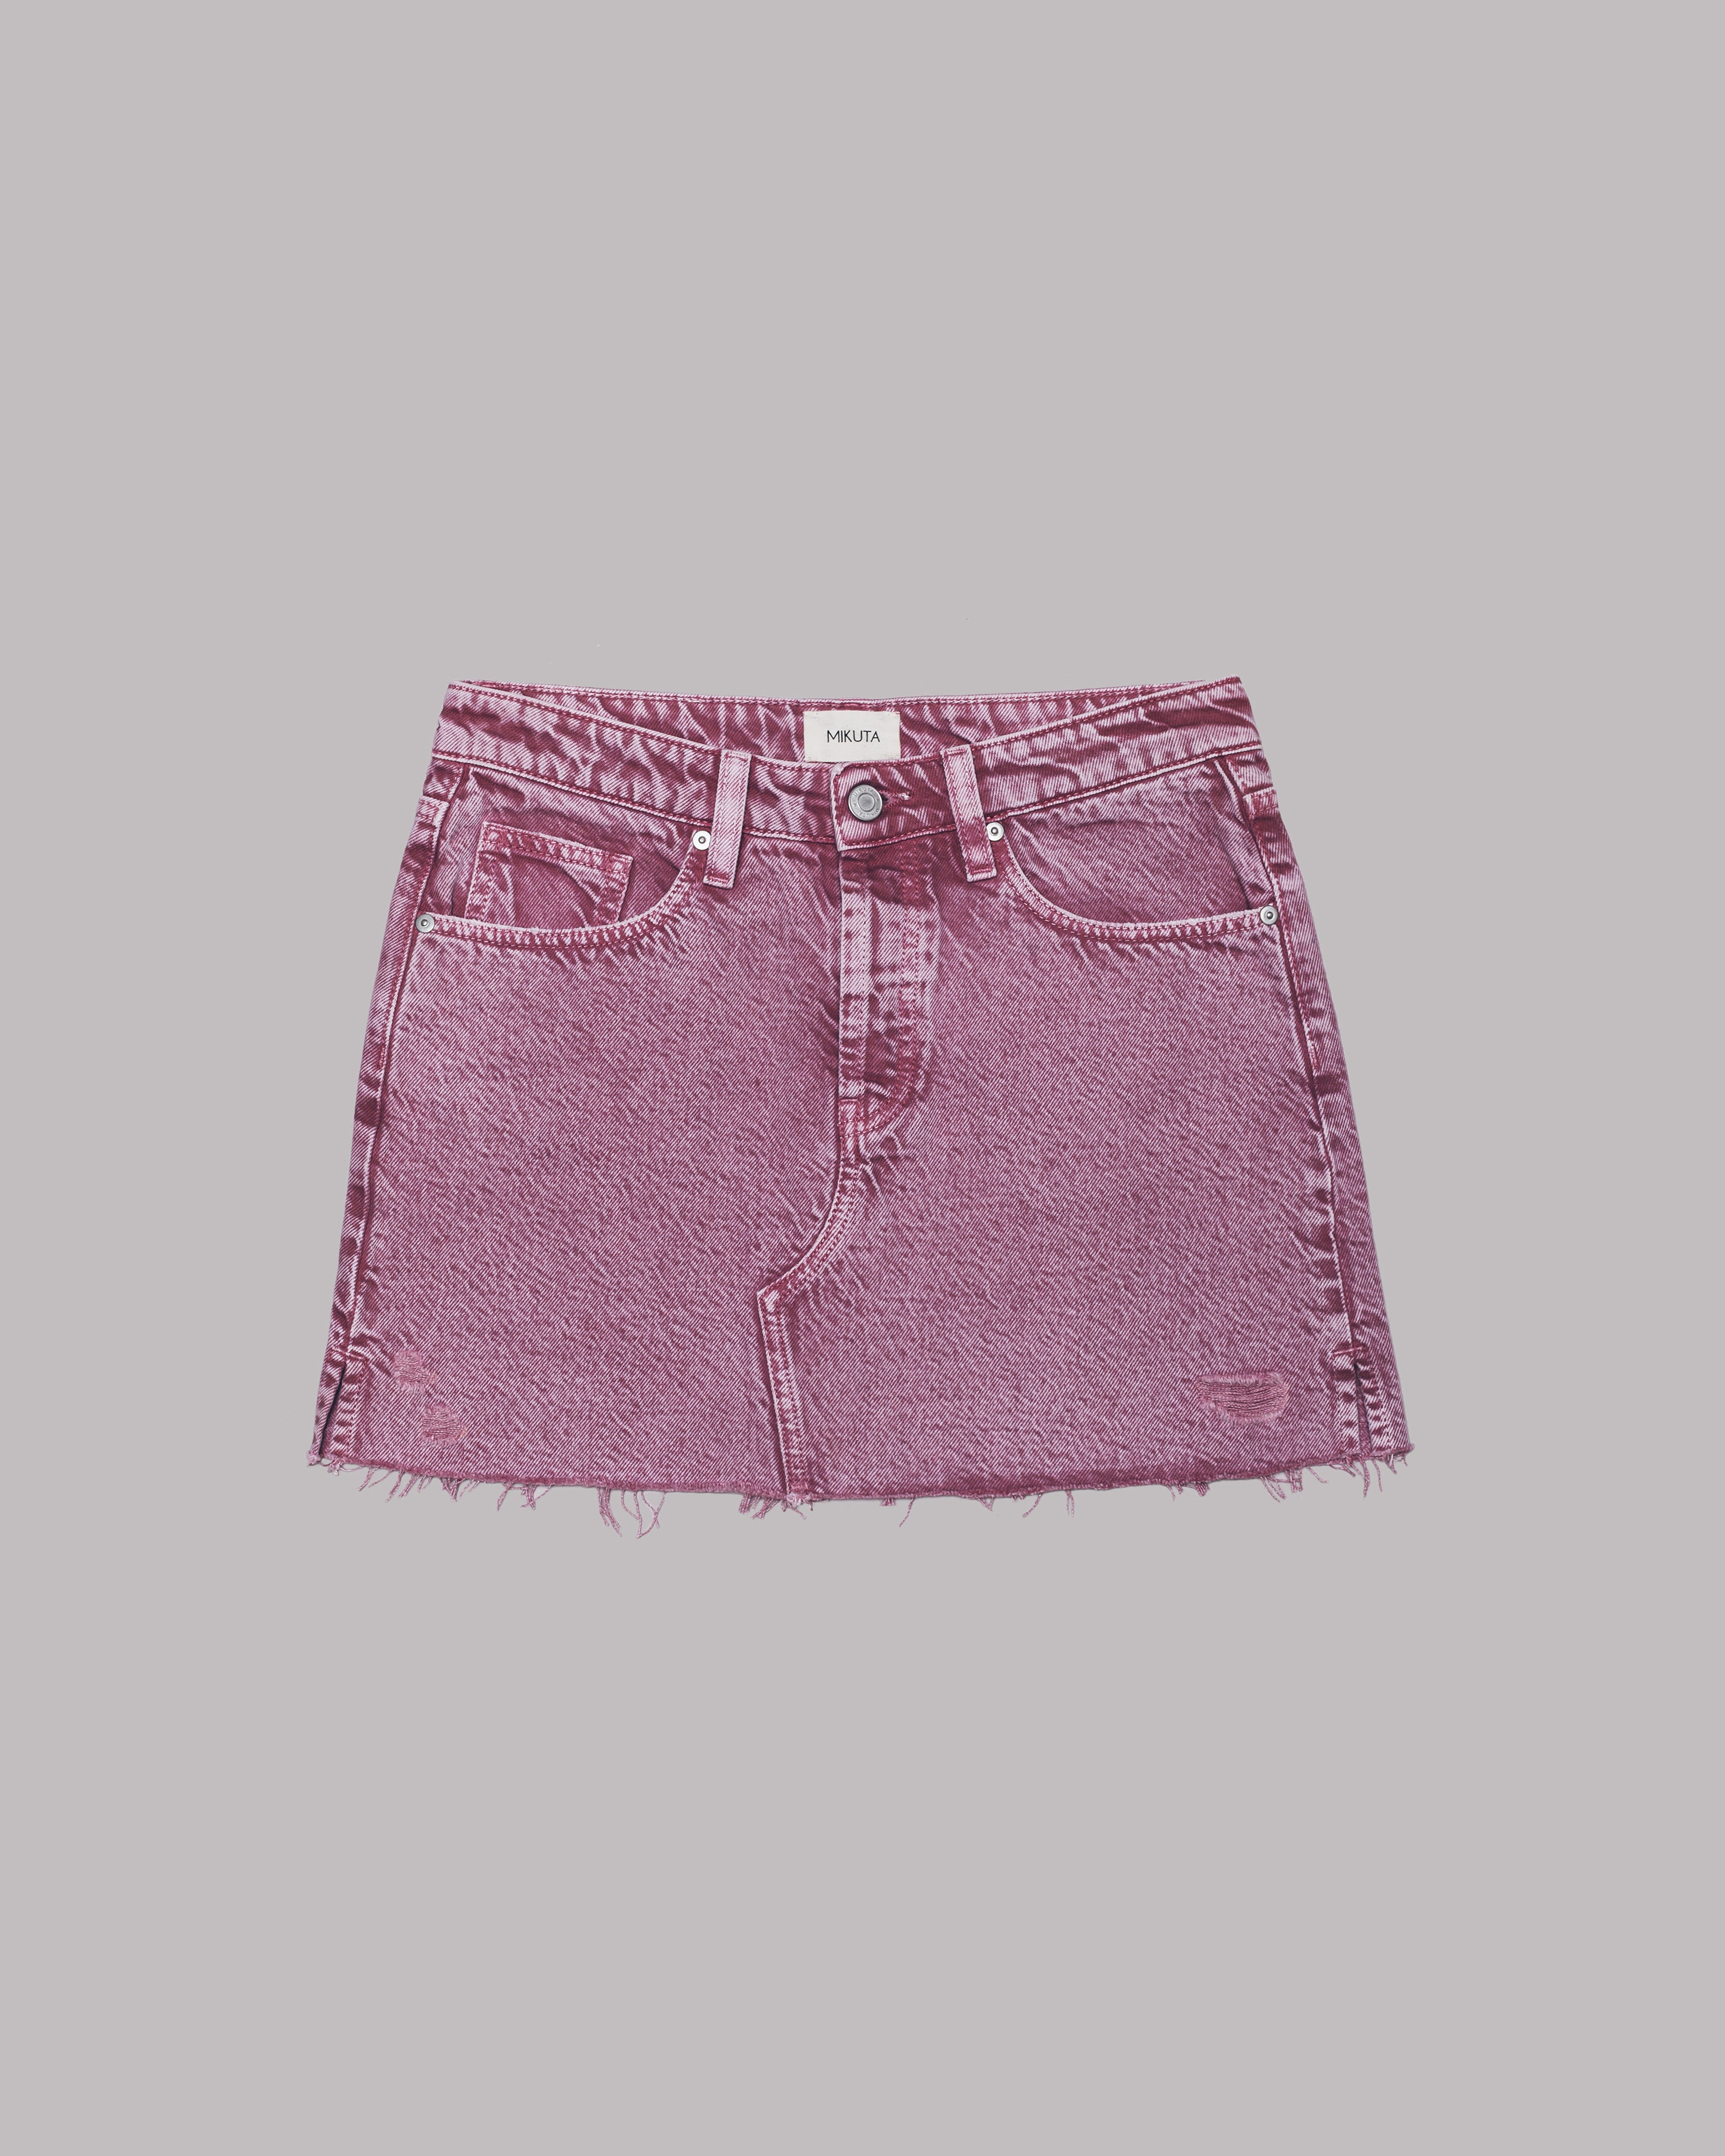 The Pink Faded Denim Skirt